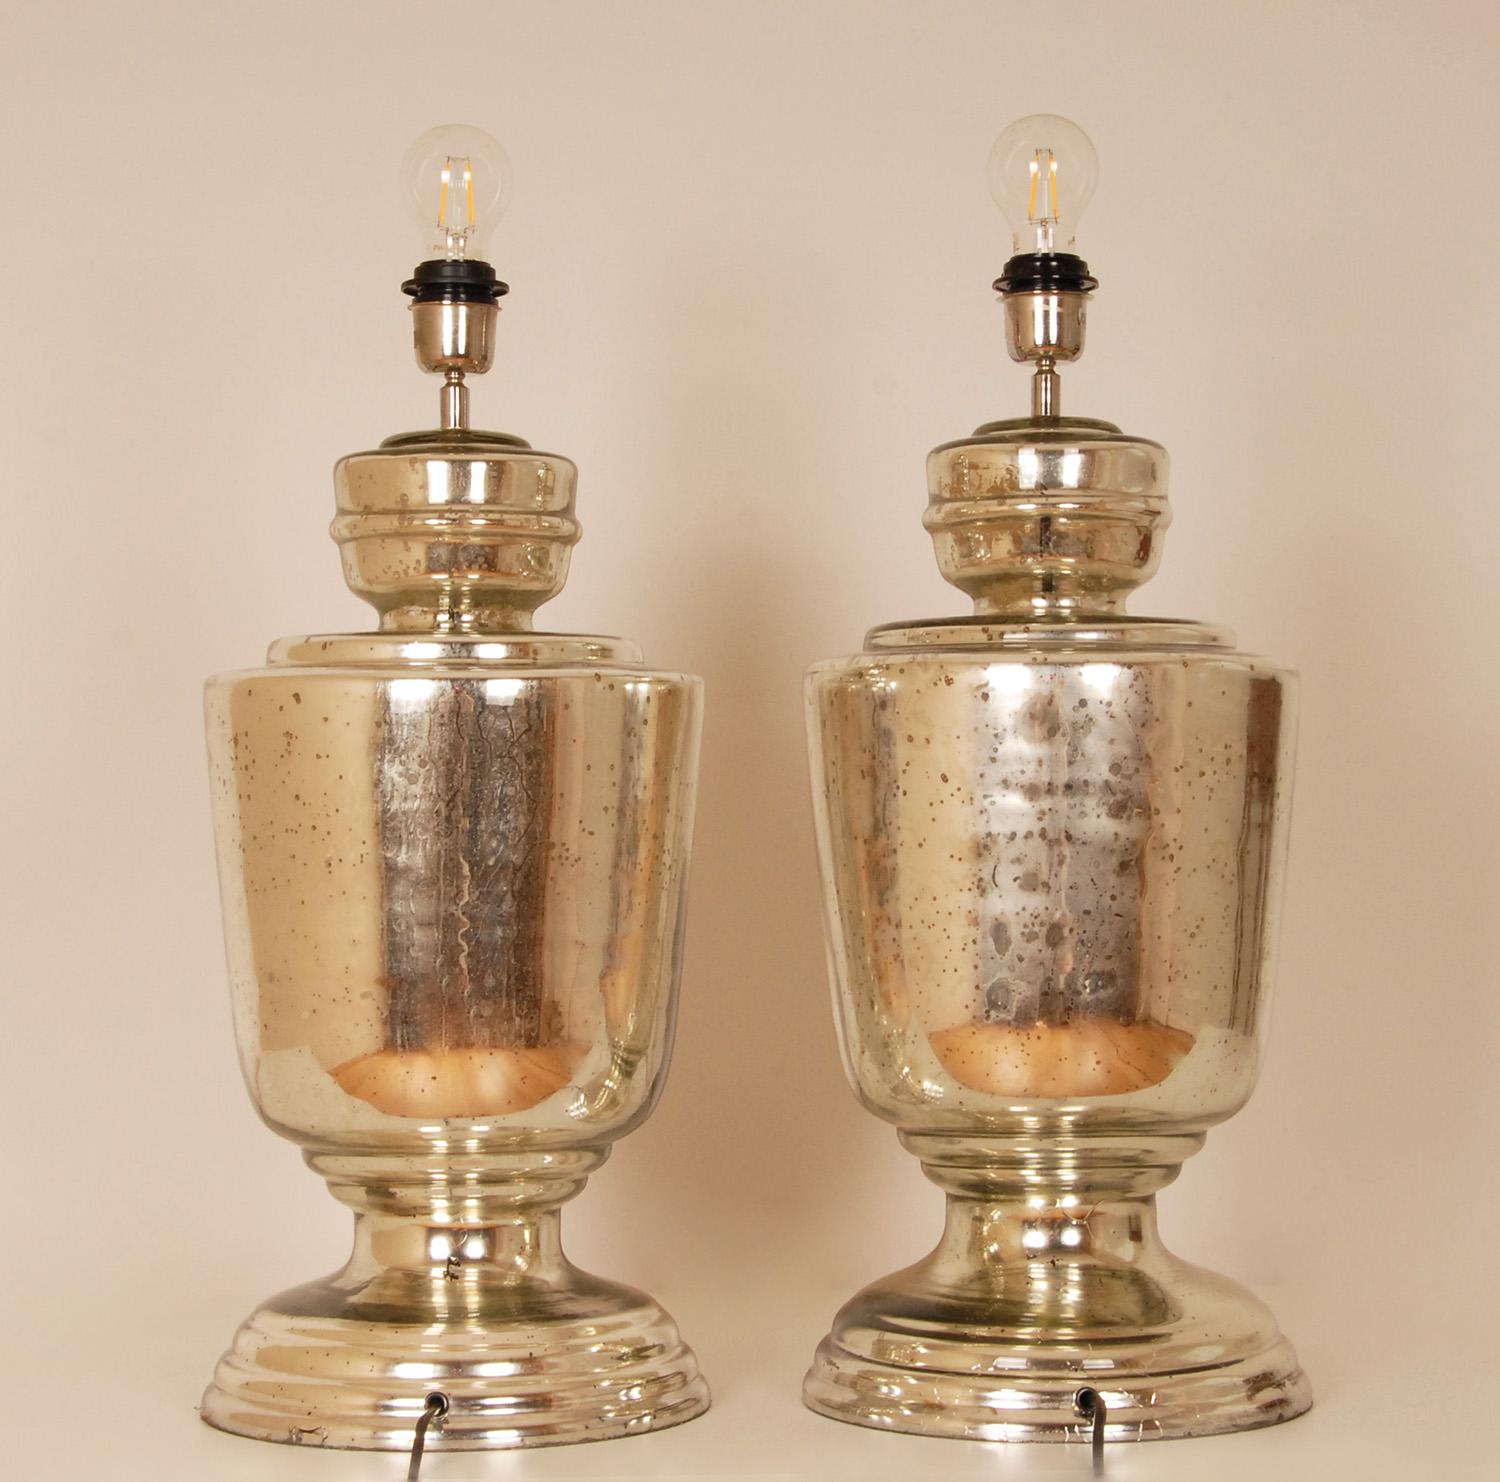 Vintage a pair tall modern mercury silver colored vase lamps table lamps
Old silver with blue lampshades ( new condition )
Style: Modern , timeless, design, French Country, French provincial
Design: In the manner of Karl Springer, Frederich Cooper,